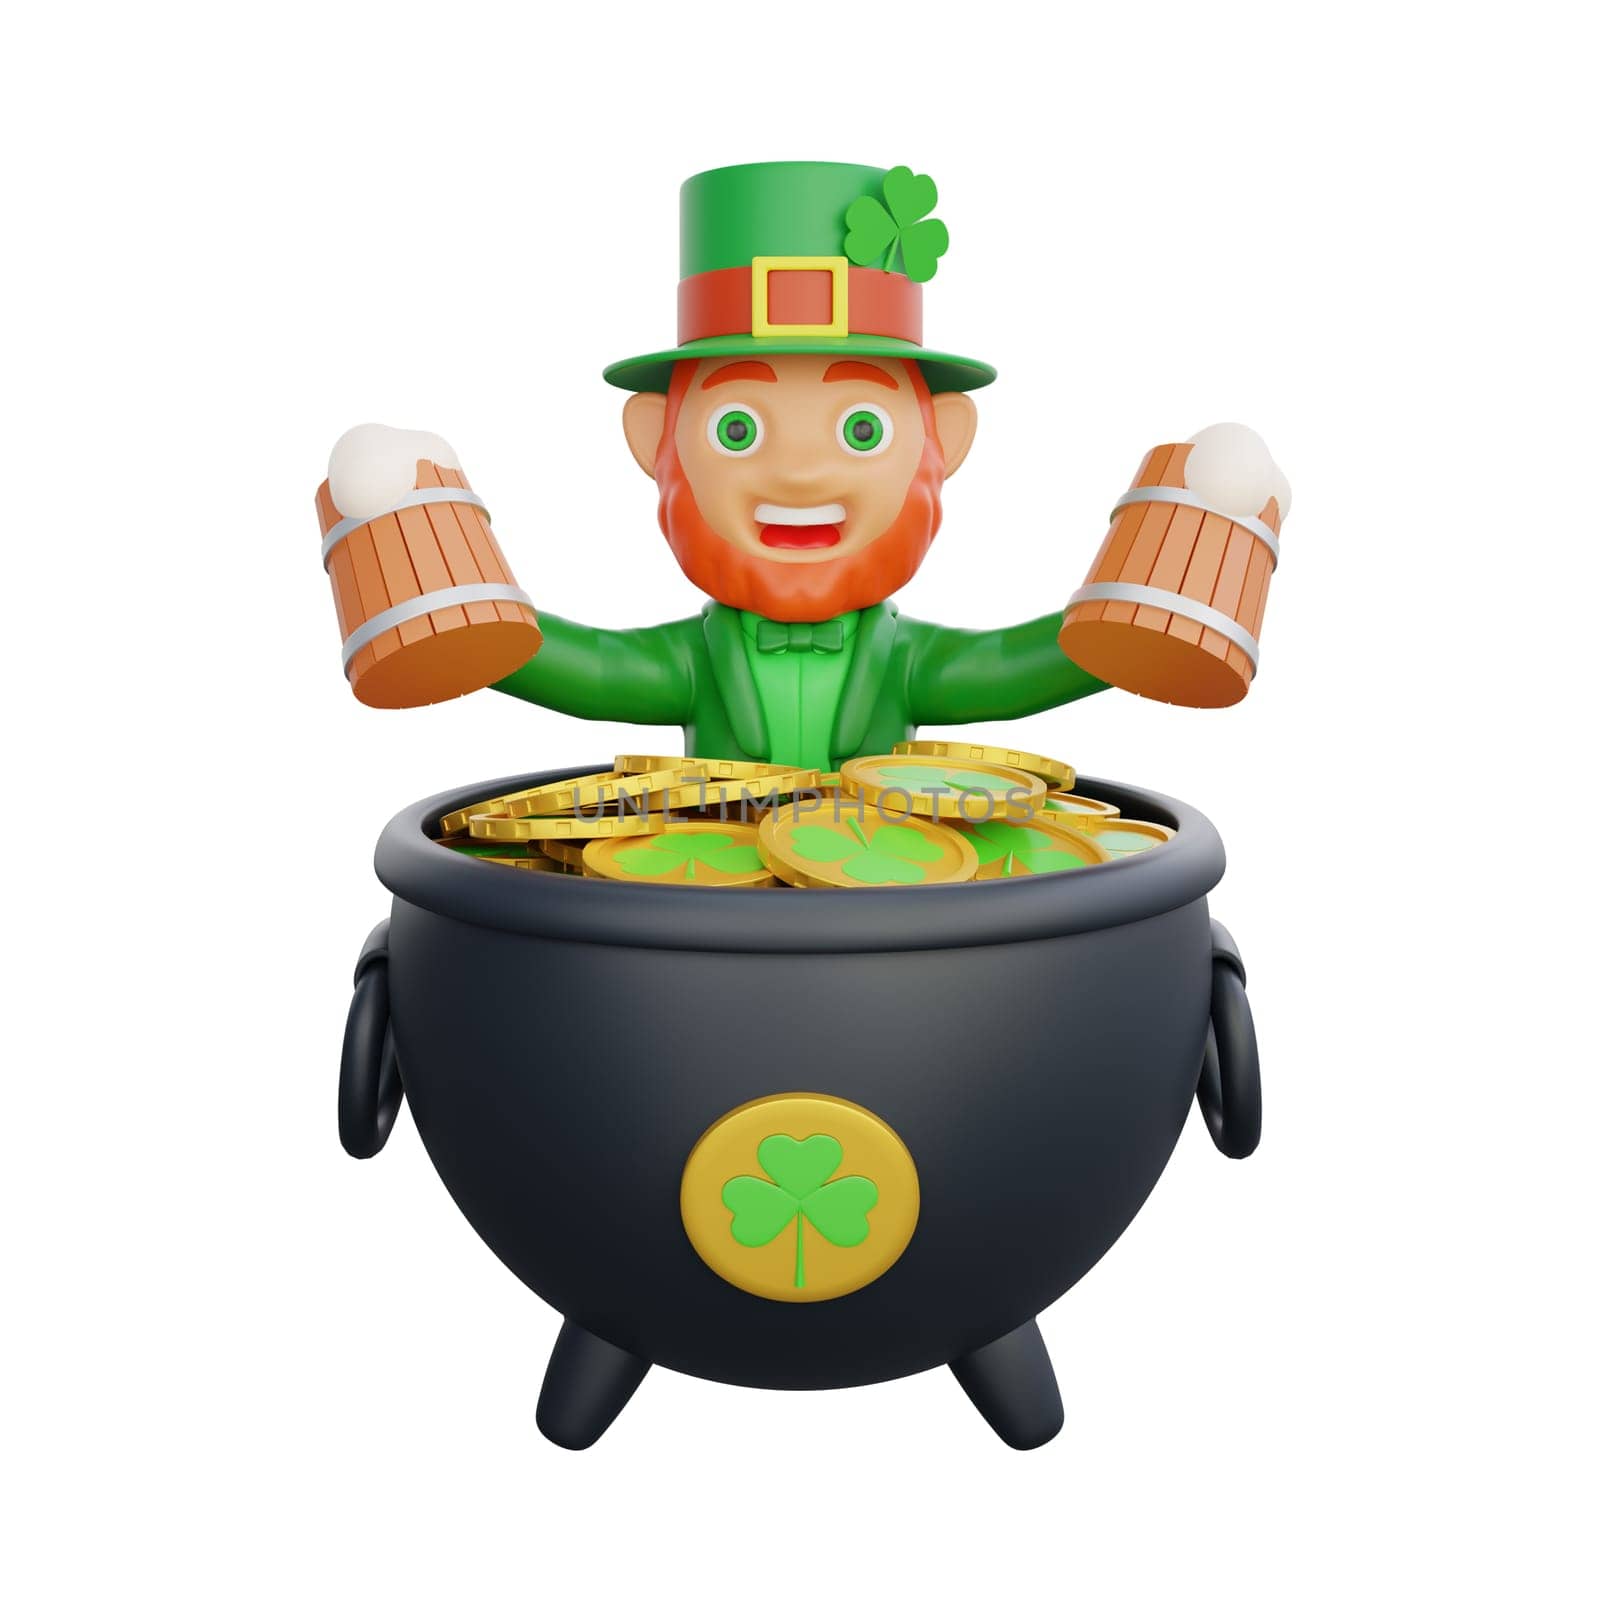 3D illustration of a joyful leprechaun holding two wooden mugs of beer, surrounded by golden coins adorned with clovers, symbolizing luck and prosperity, perfect for St. Patrick's Day themed projects